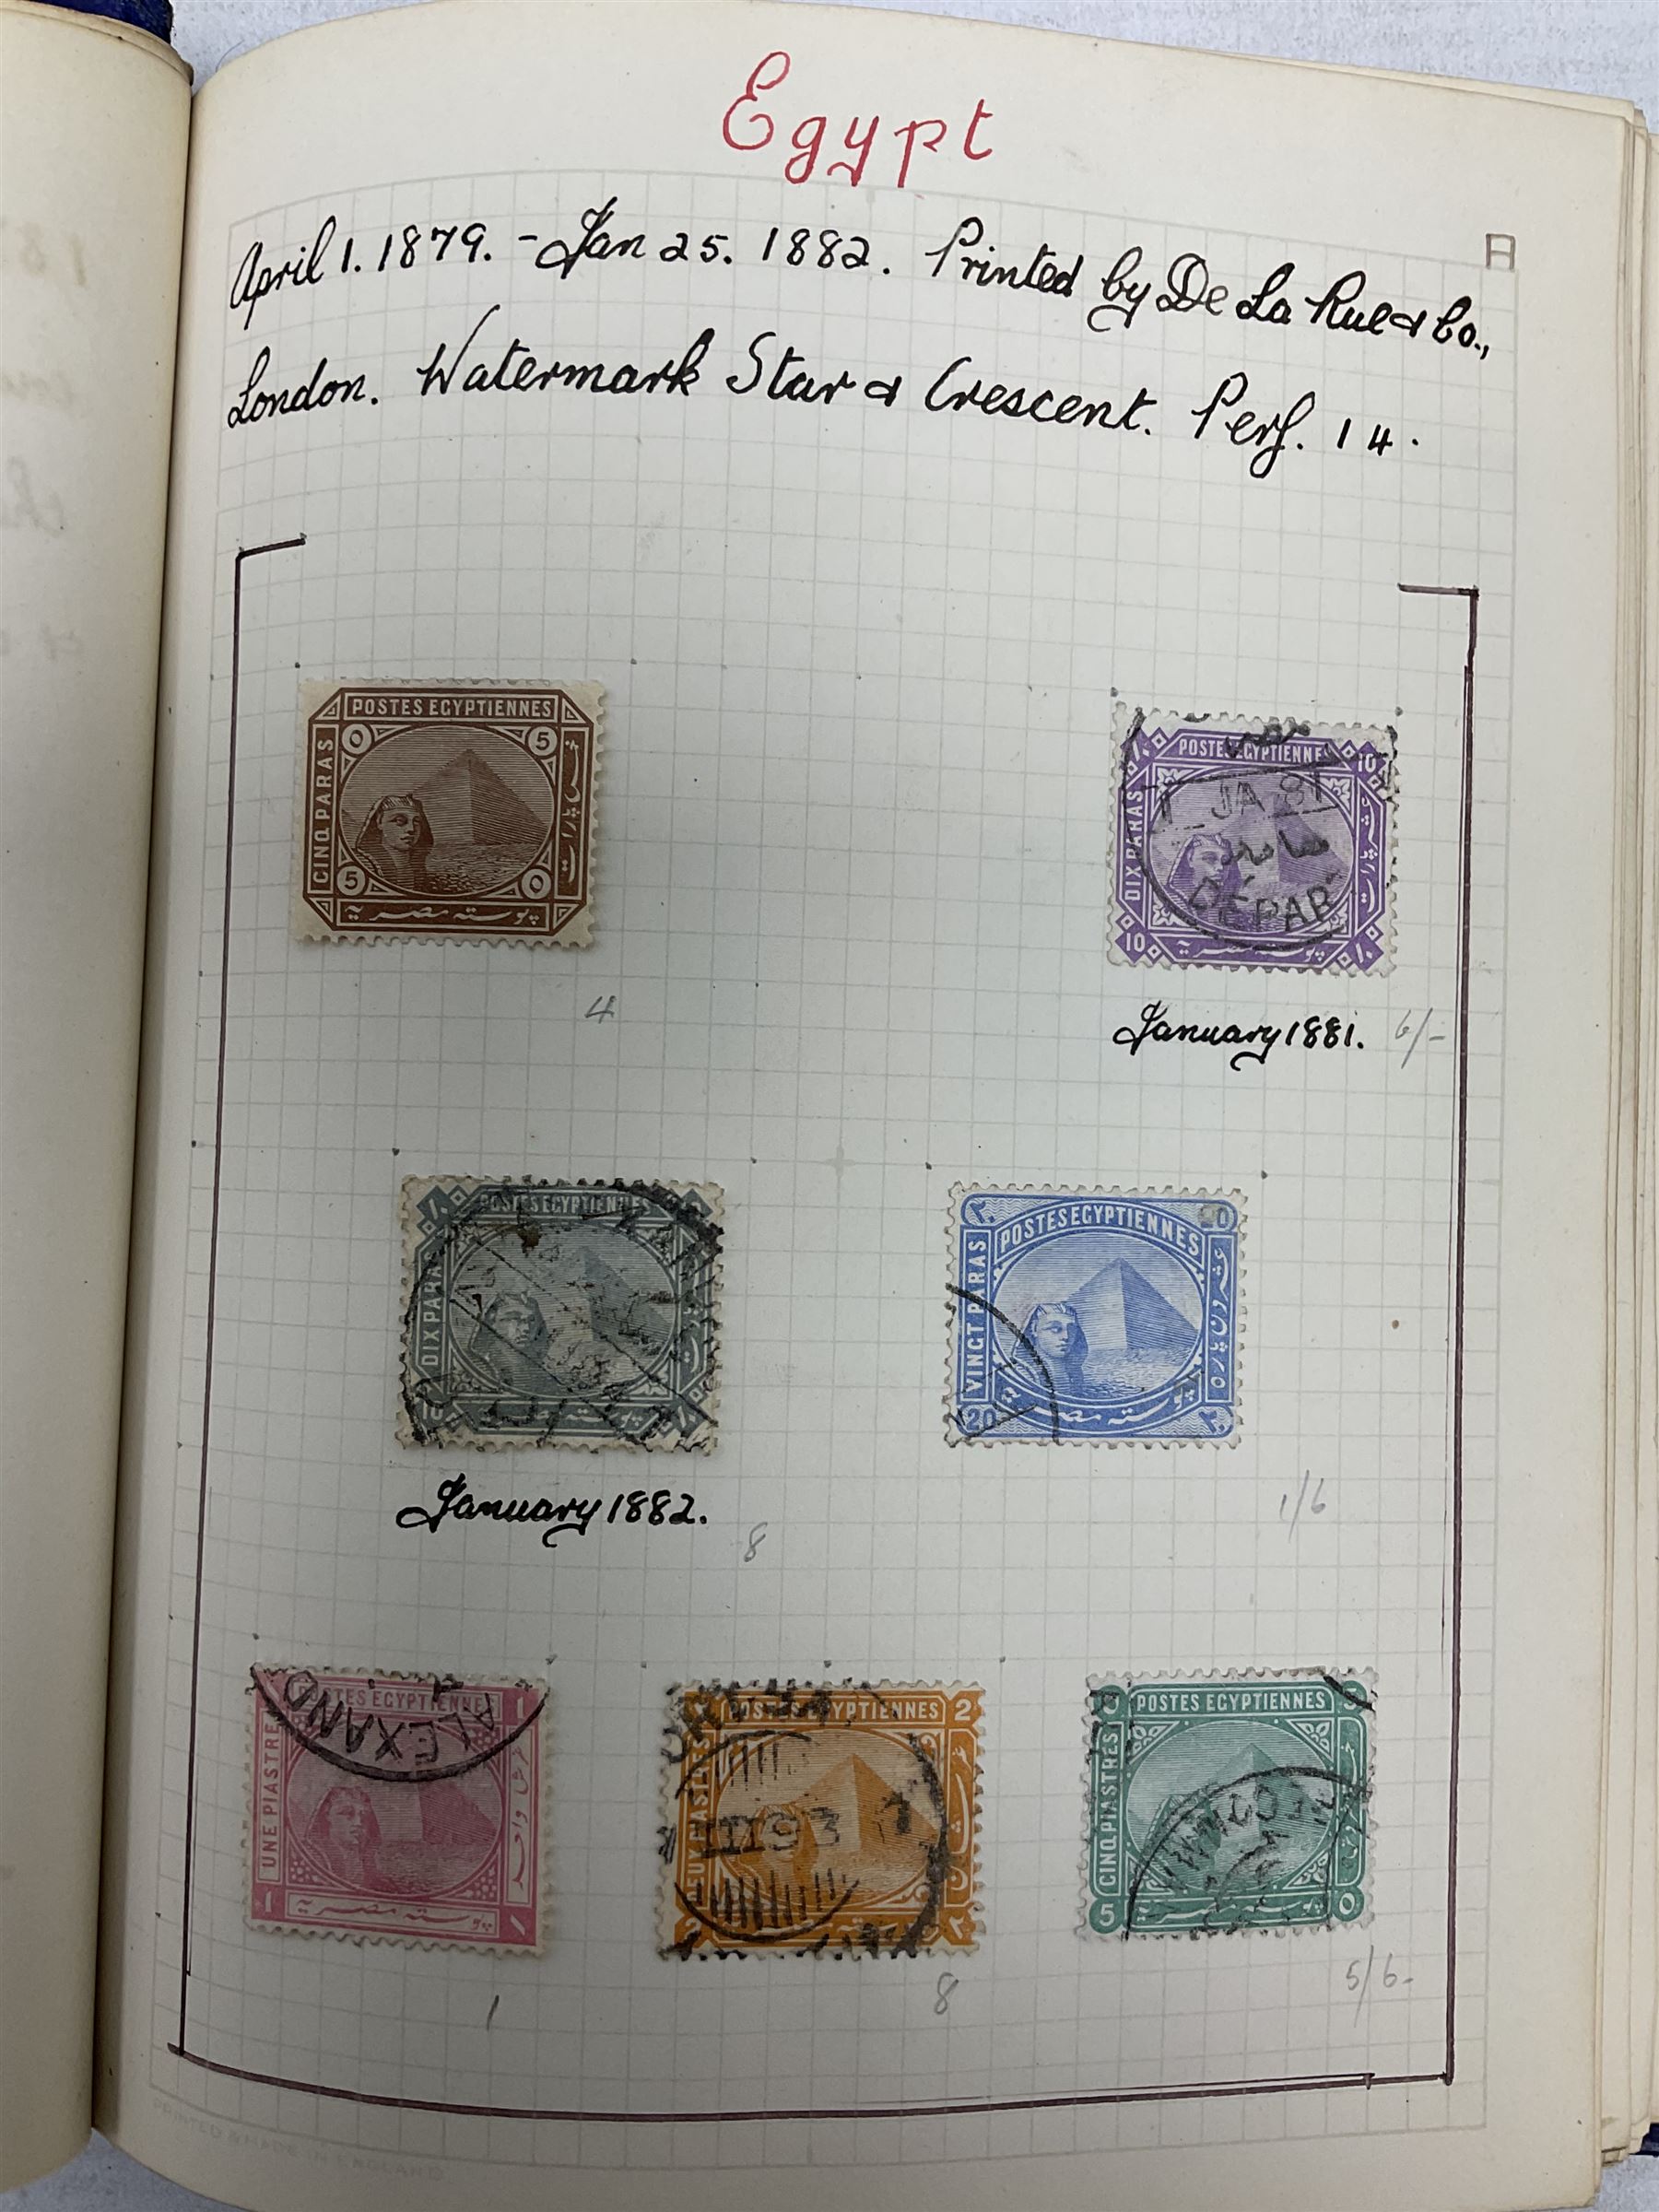 Egypt 1866 and later stamps - Image 300 of 761